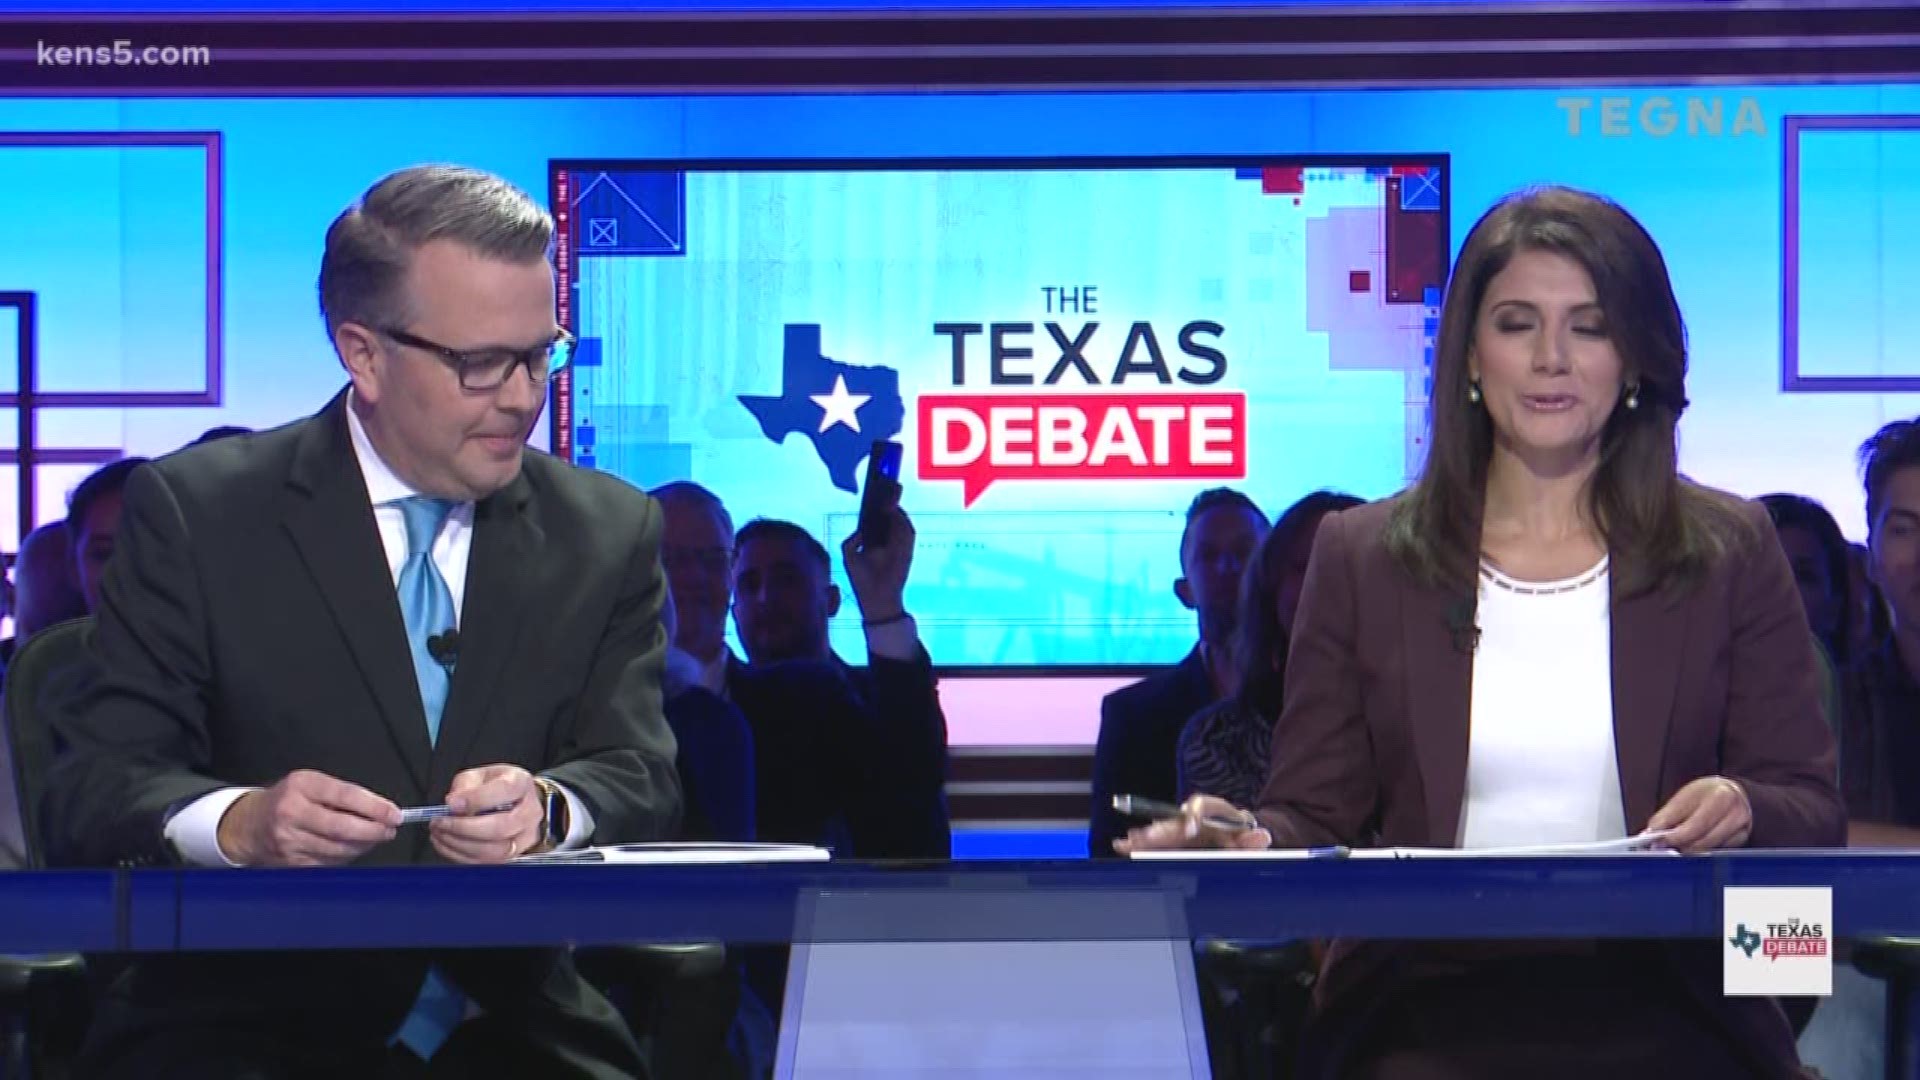 Republican Senator Ted Cruz and Democratic candidate Beto O'Rourke are welcomed to the studio for the Texas Debate.